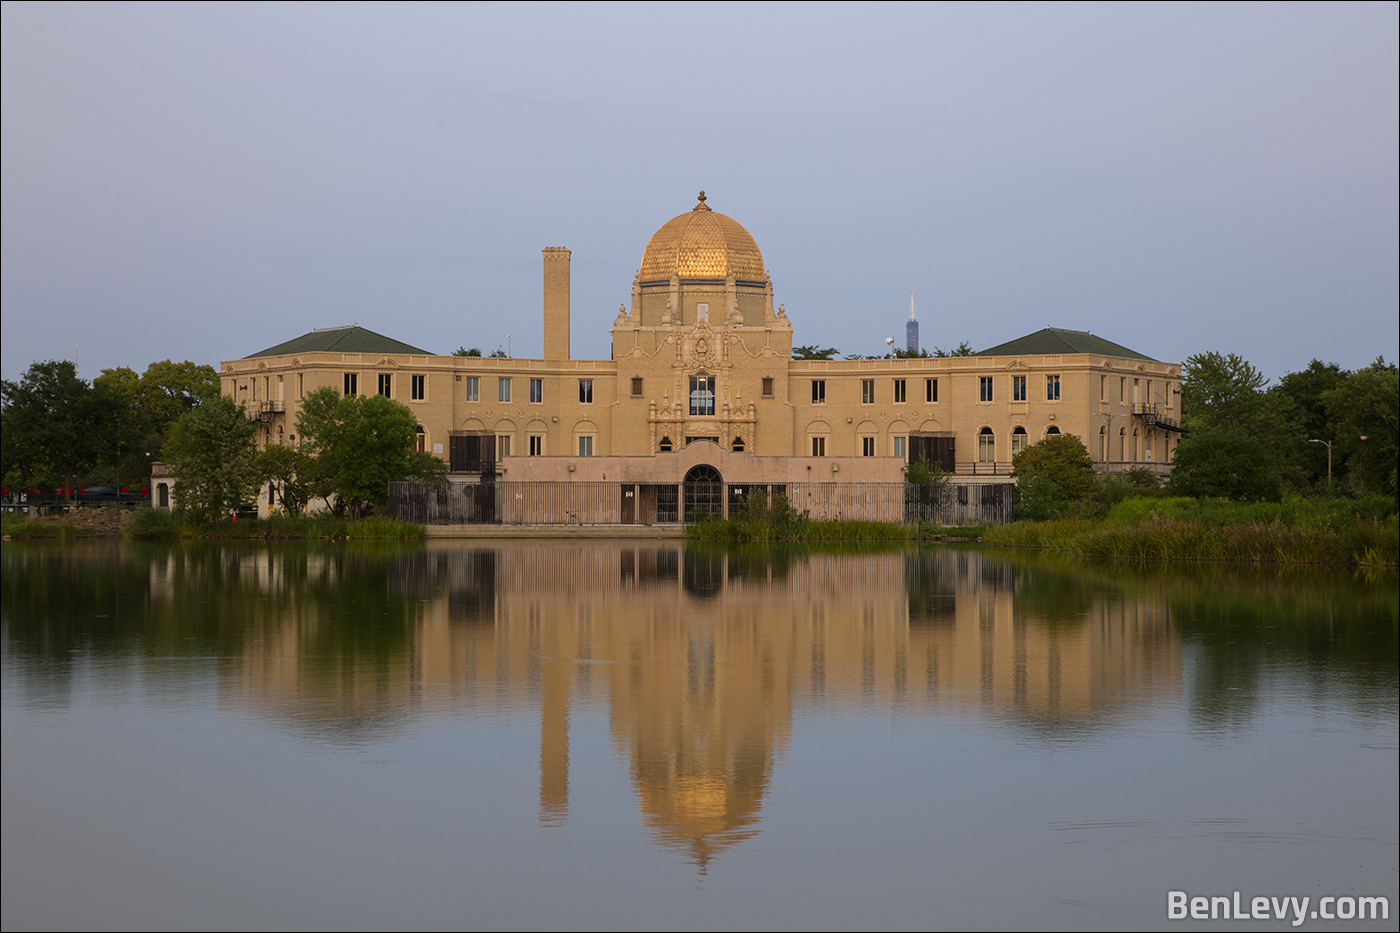 The Garfield Park Fieldhouse reflected in the lagoon